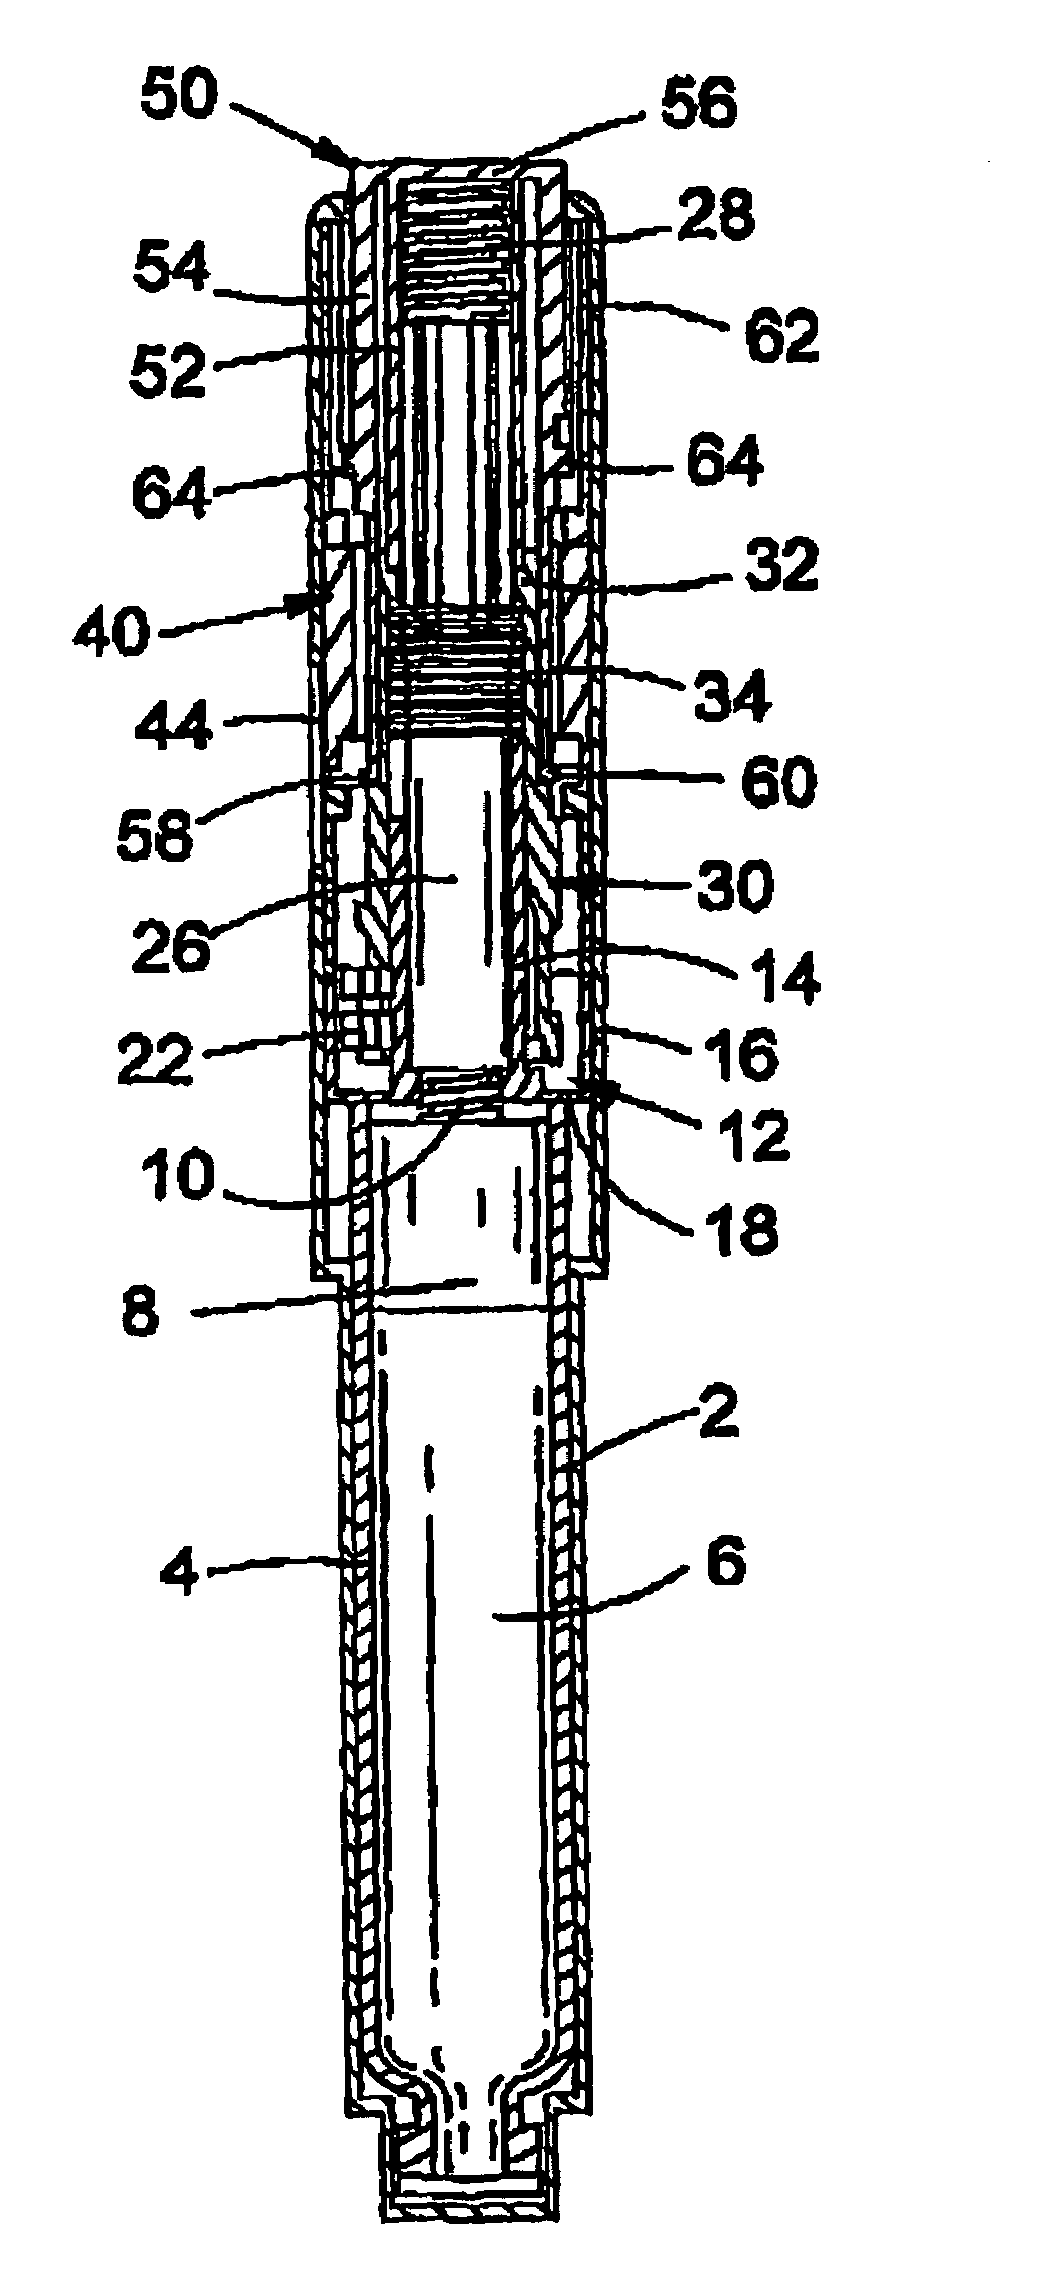 Dose dial and drive mechanisms suitable for use in drug delivery devices